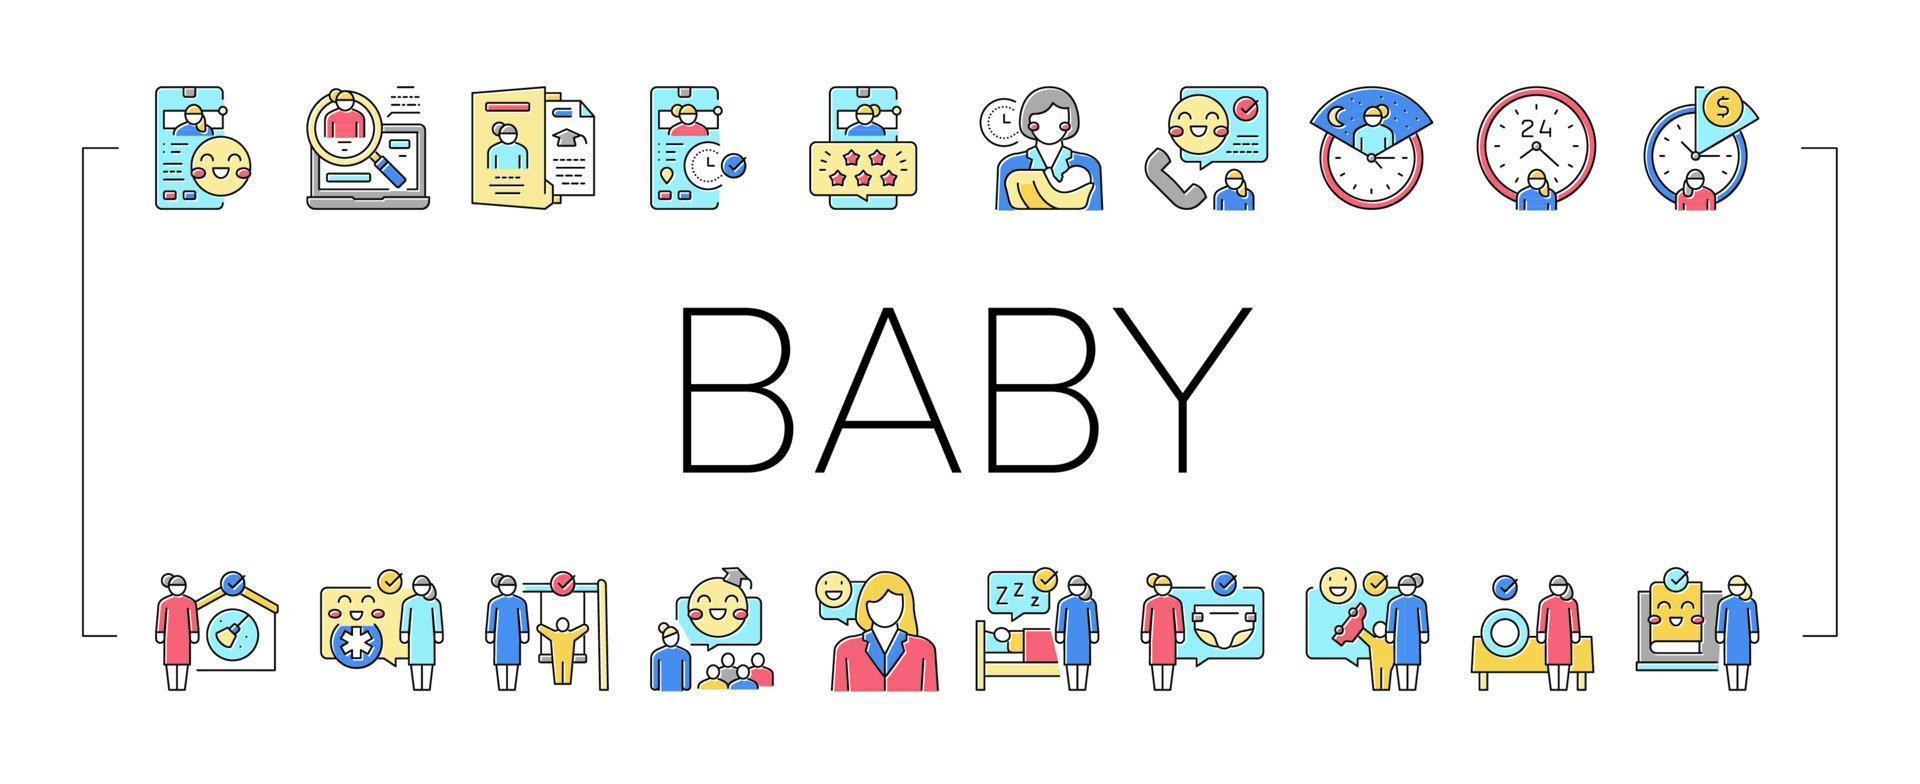 Baby Sitting Work Occupation Icons Set Vector